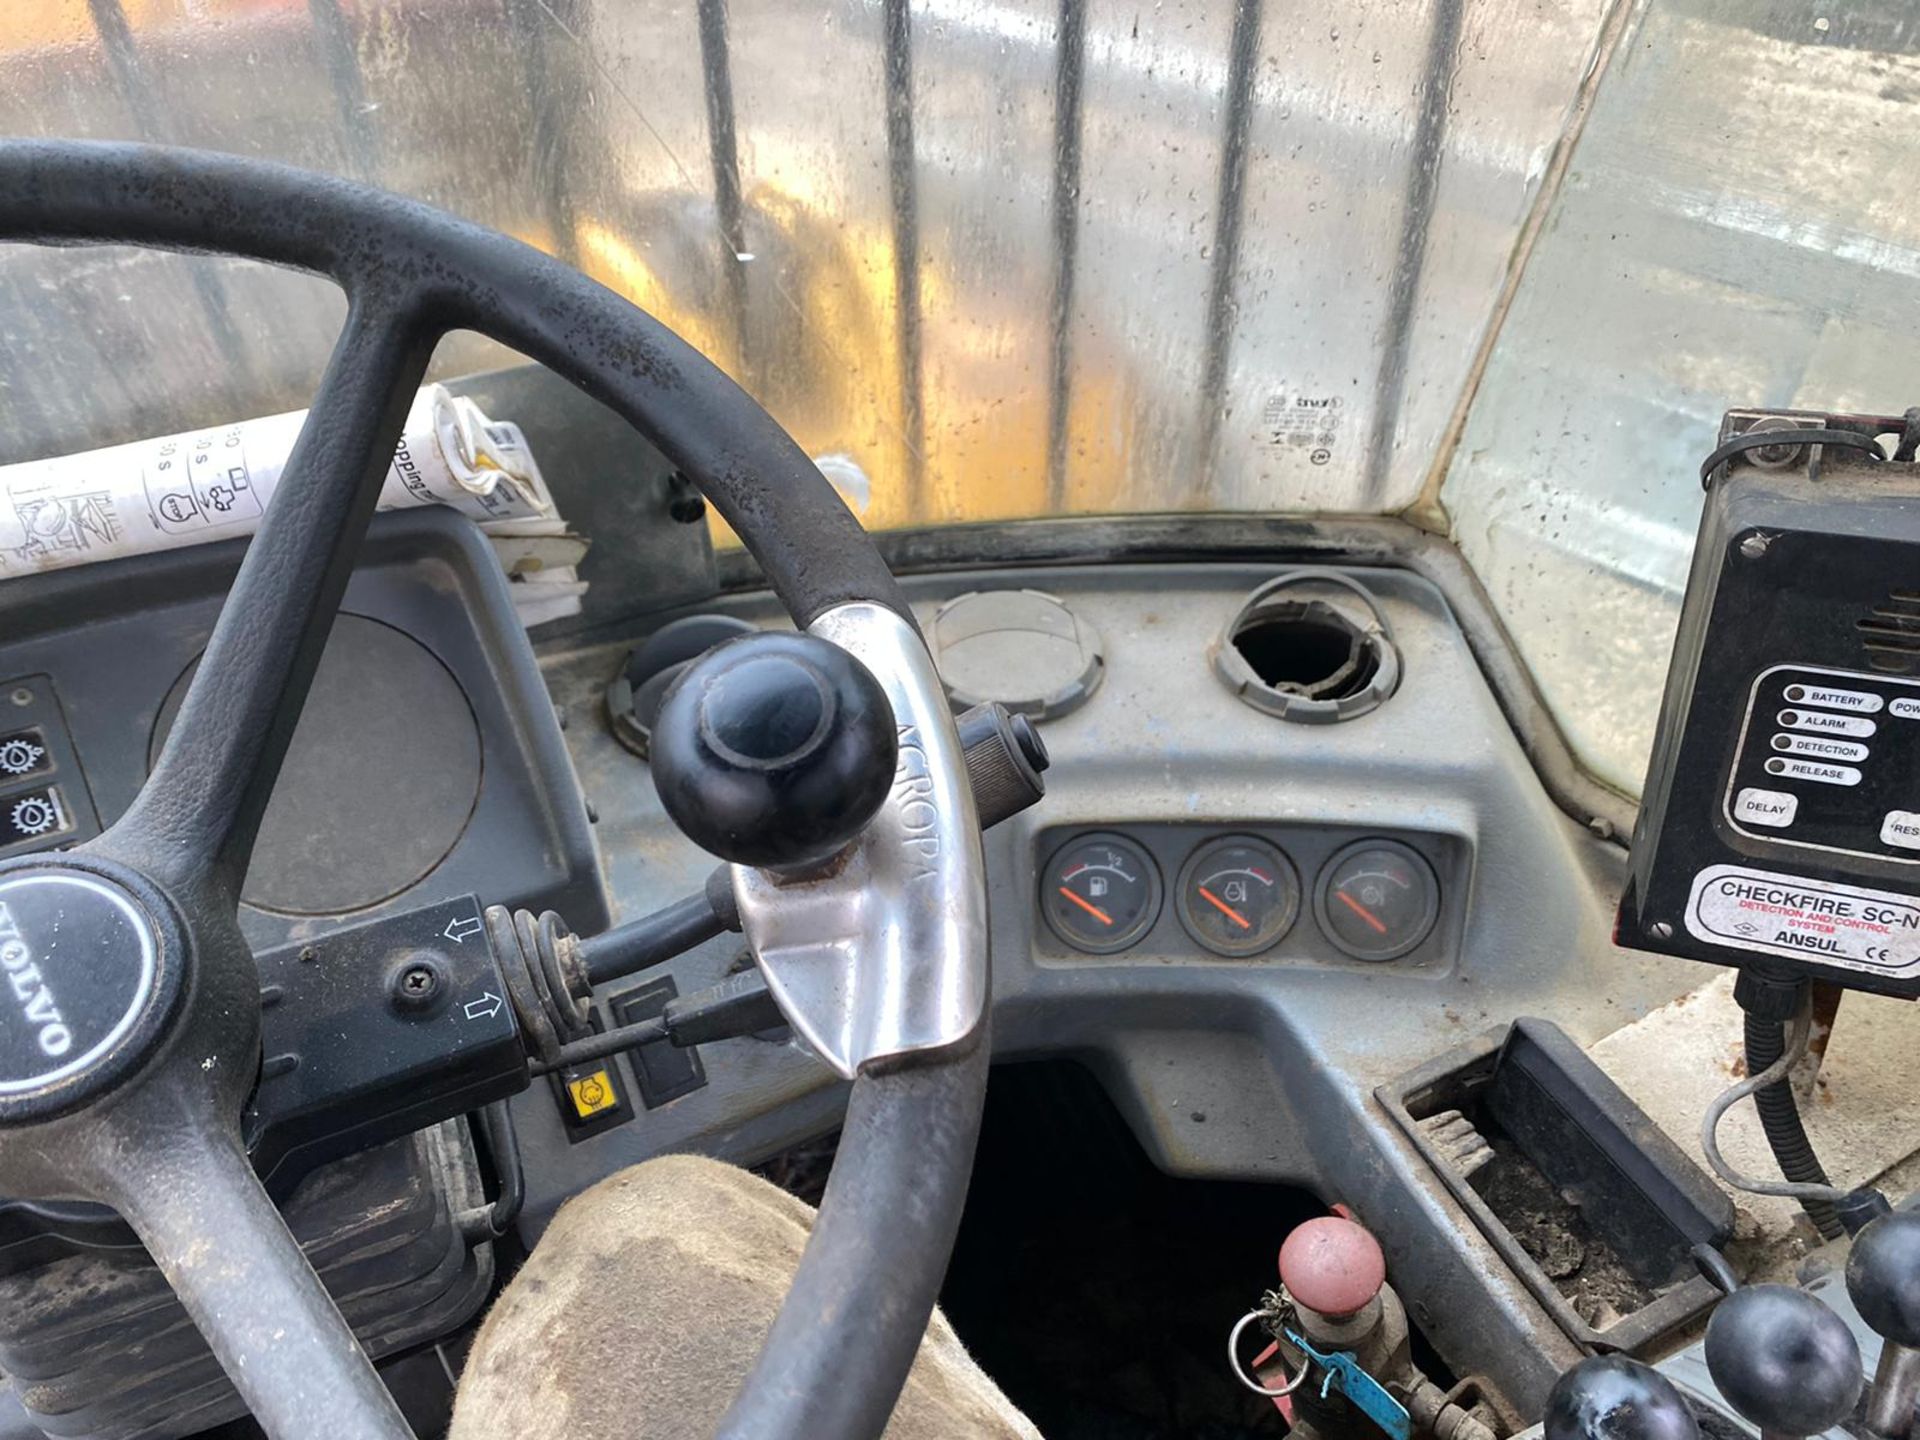 VOLVO L70C LOADING SHOVEL, RUNS AND LIFTS, BUT NO DASH LIGHTS SO FORWARD & REVERSE DONT WORK - Image 5 of 9